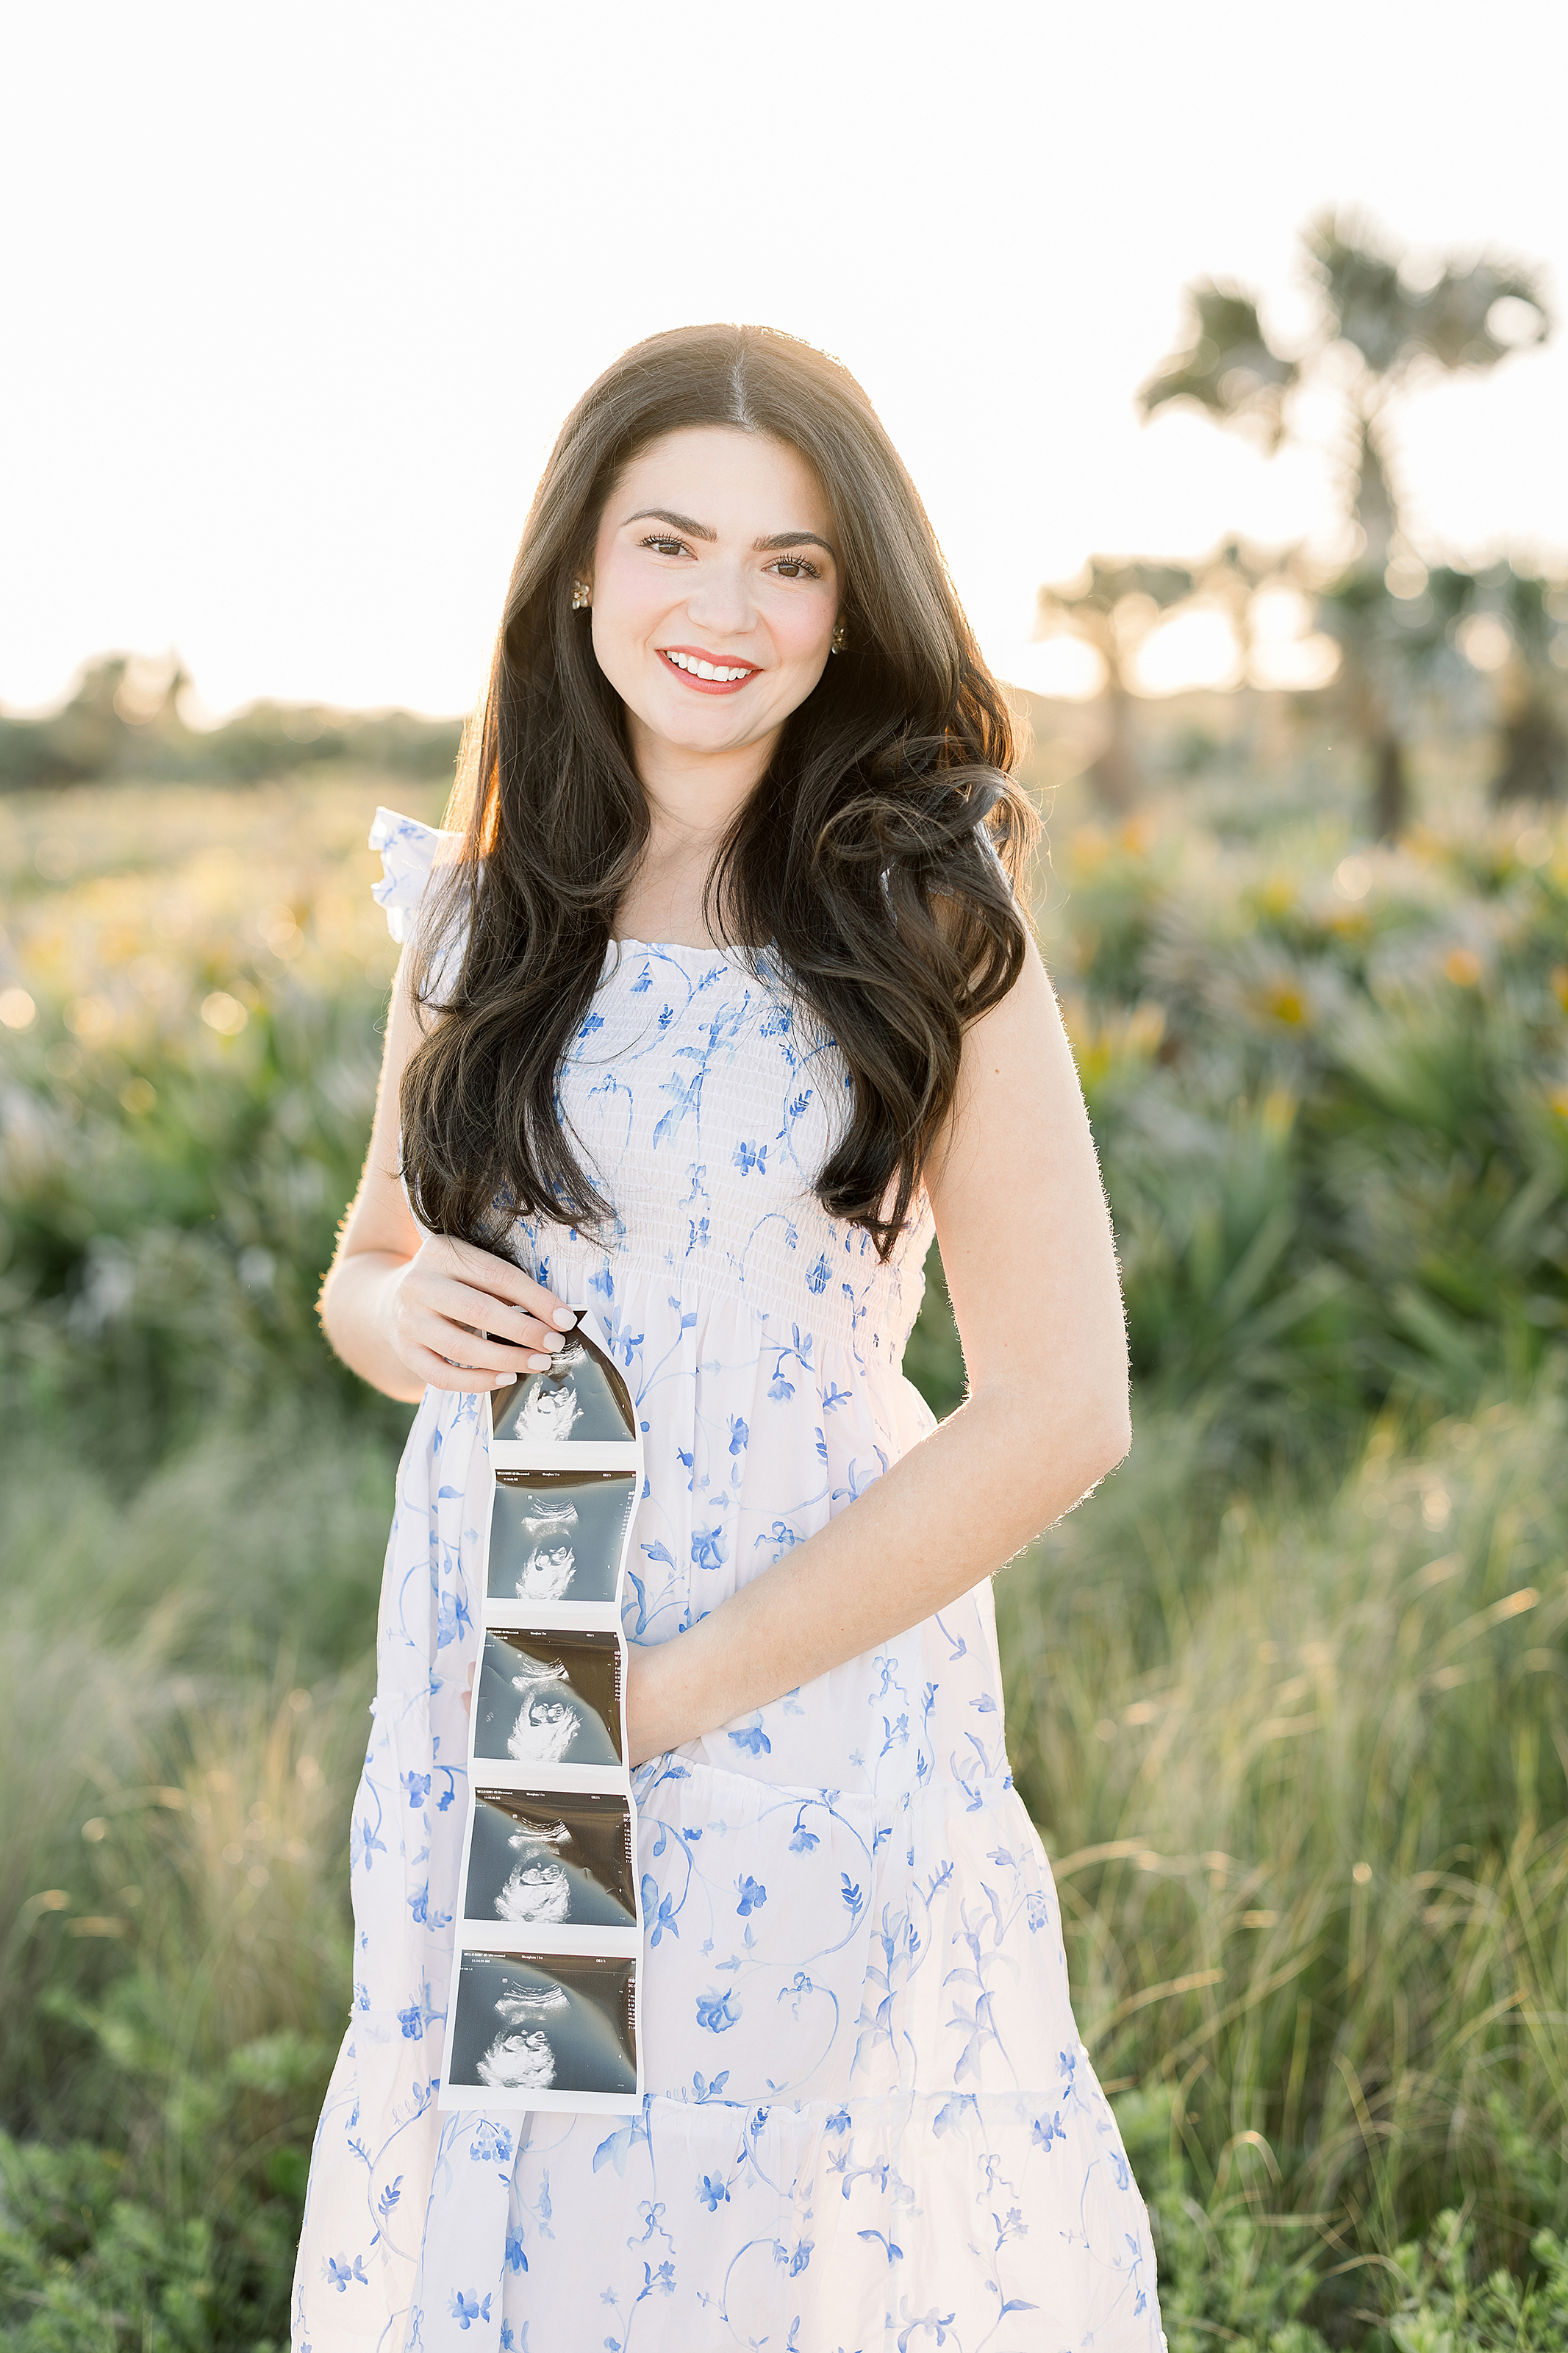 A Golden Hour sunset pregnancy announcement portrait of a woman in a blue and white dress.